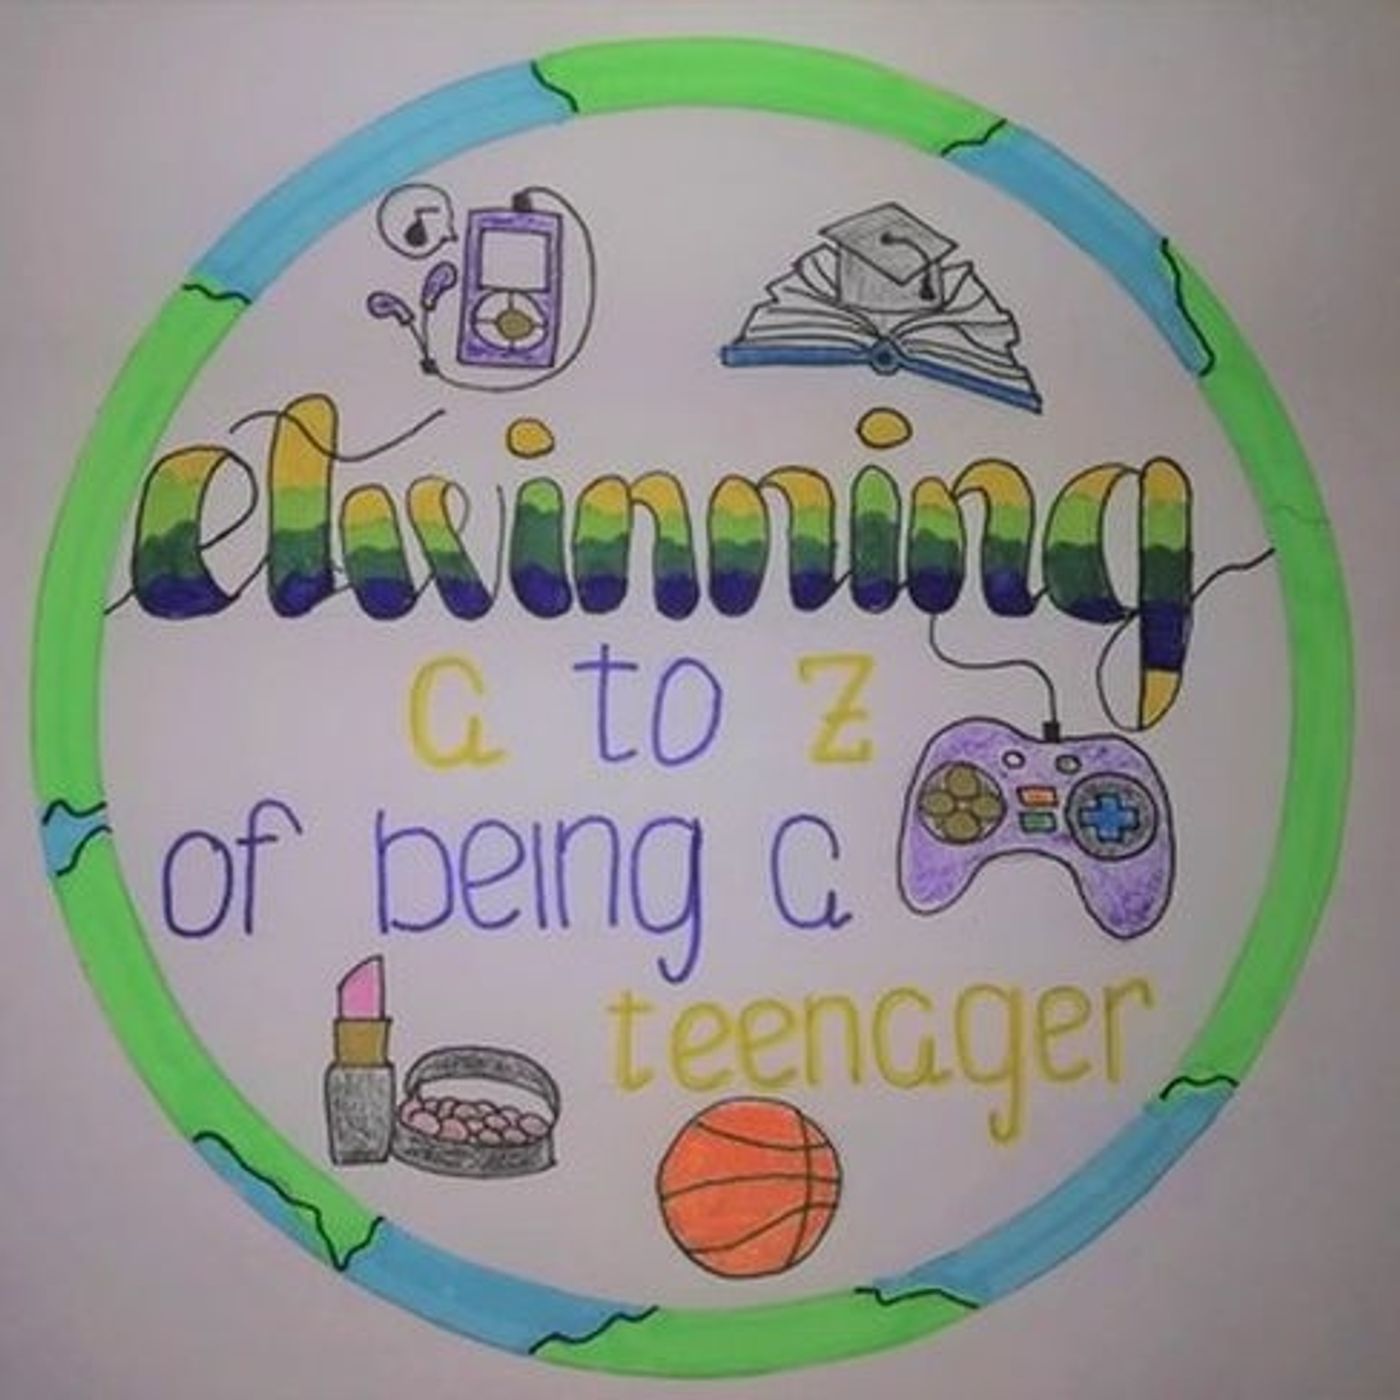 10 STORIES - A TO Z OF BEING A TEENAGER